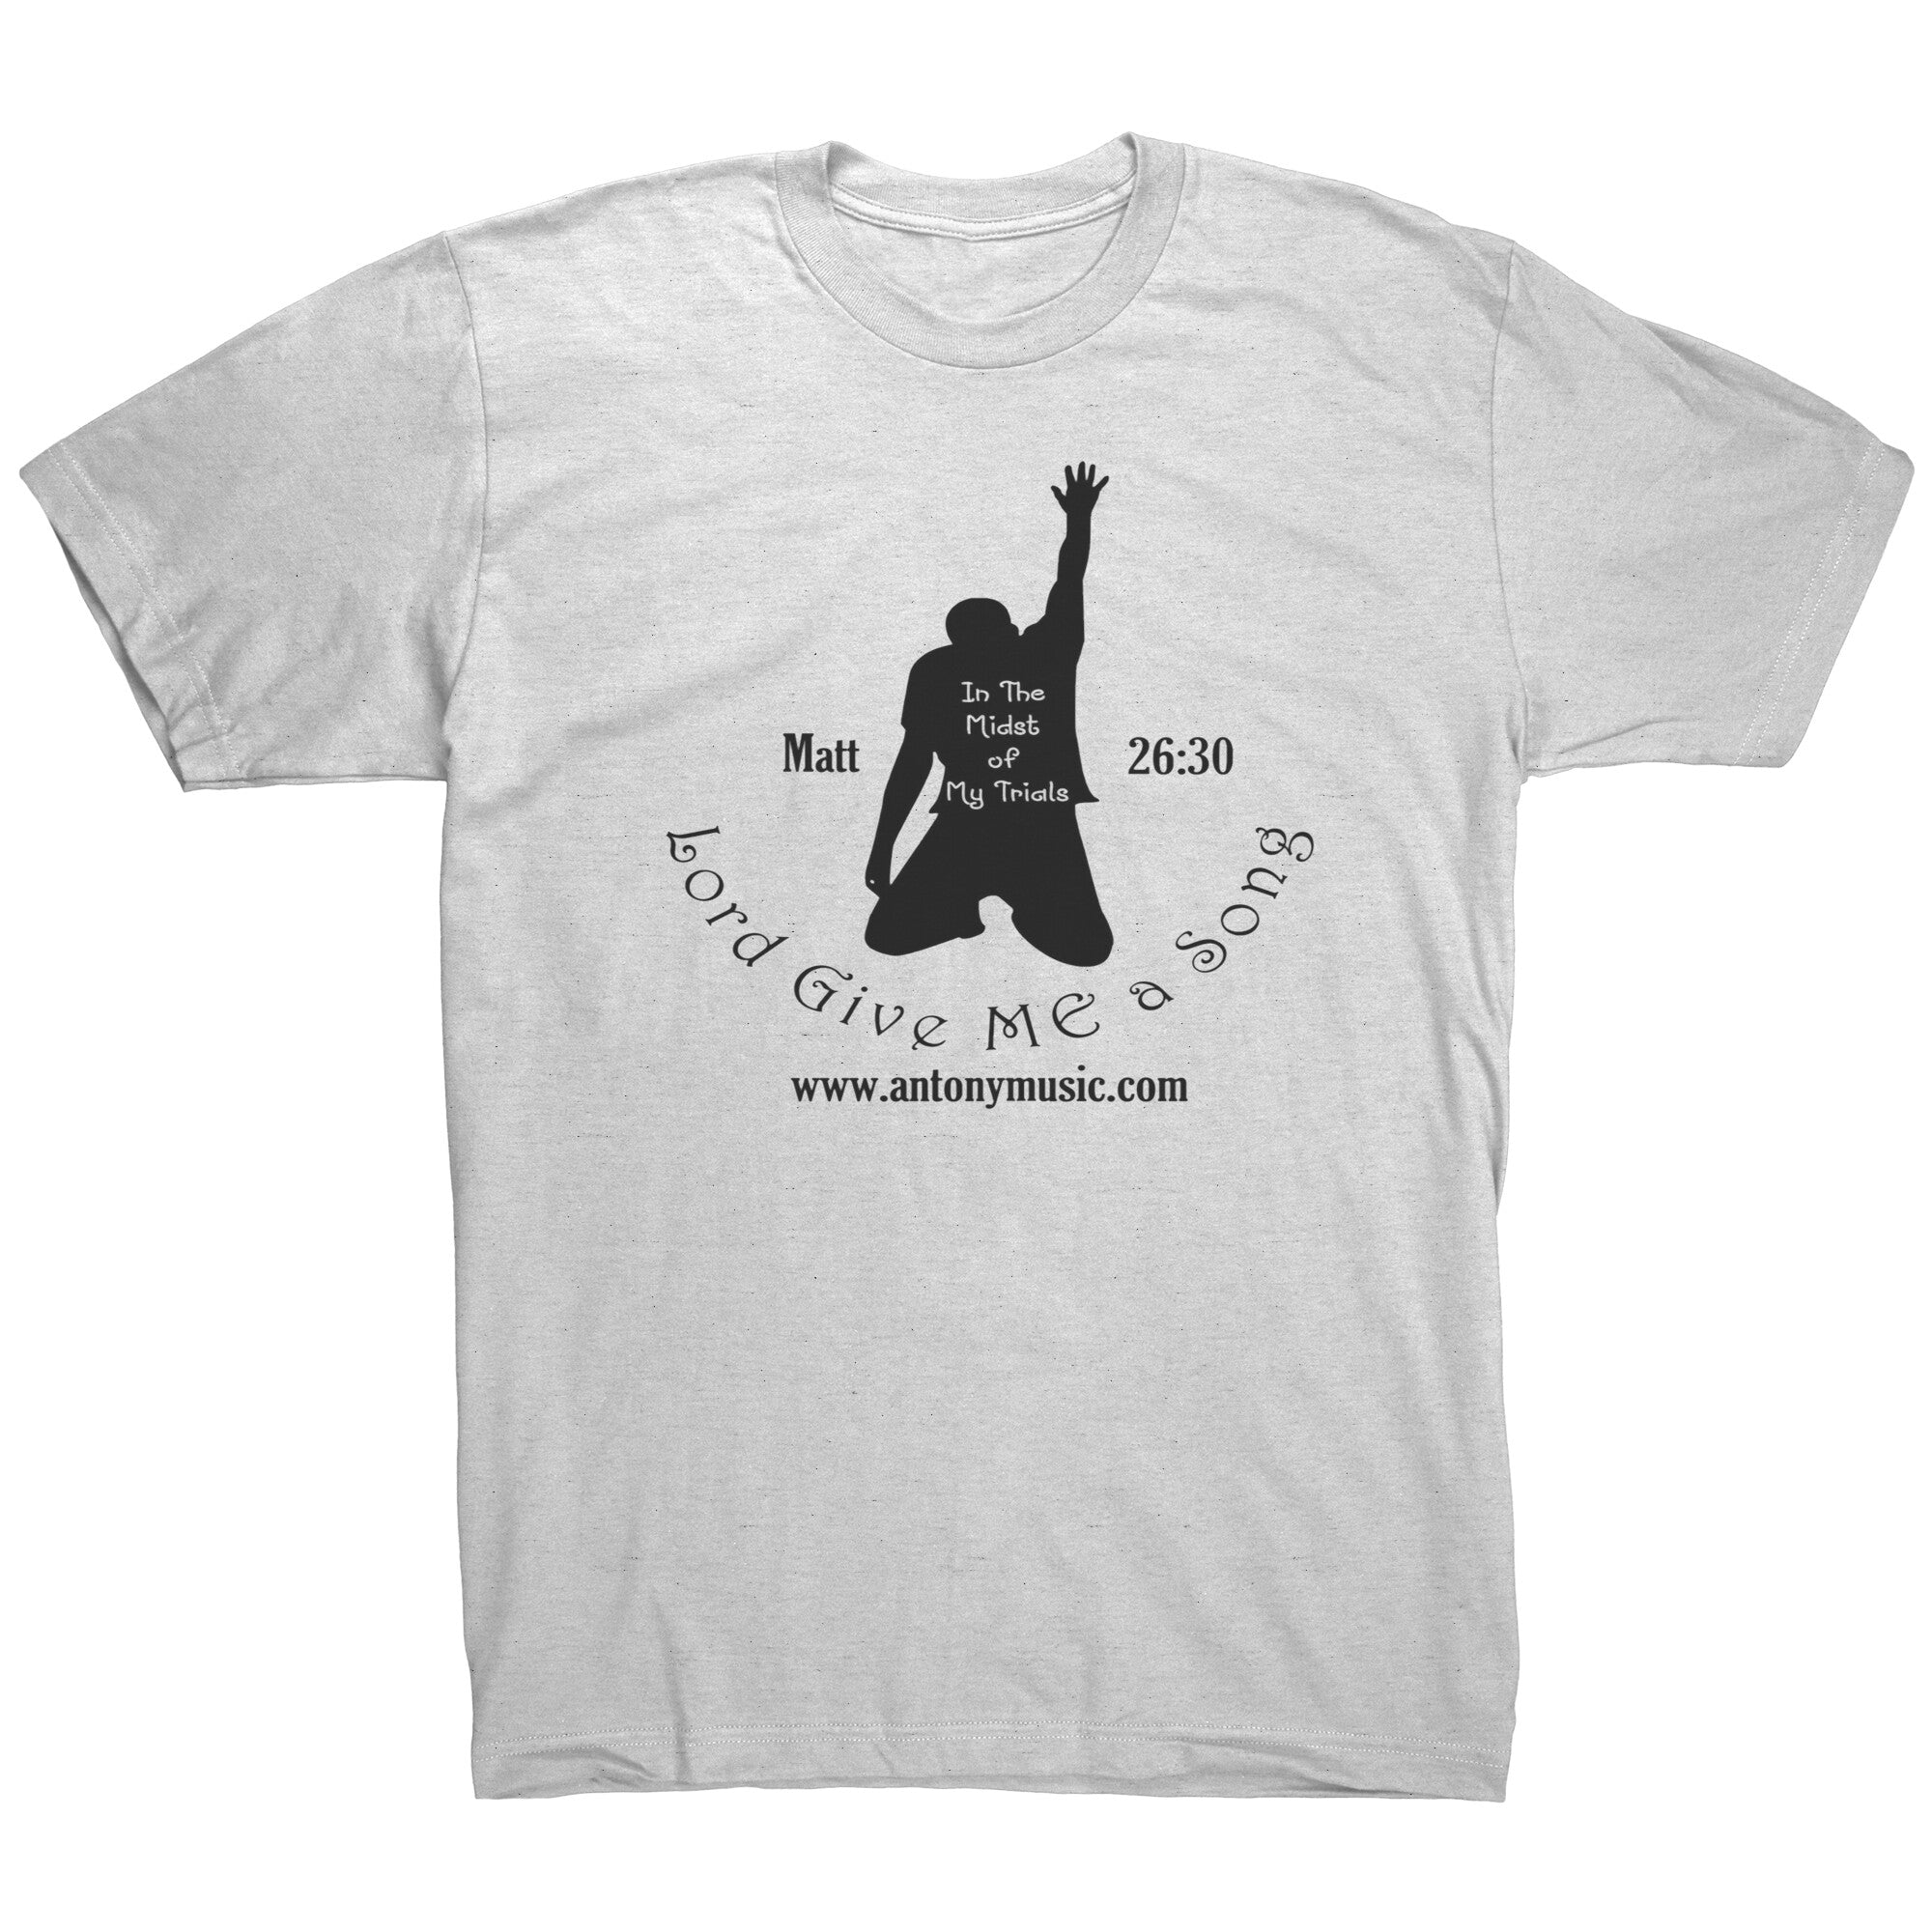 Give Me A Song Like Jesus Tee Men's